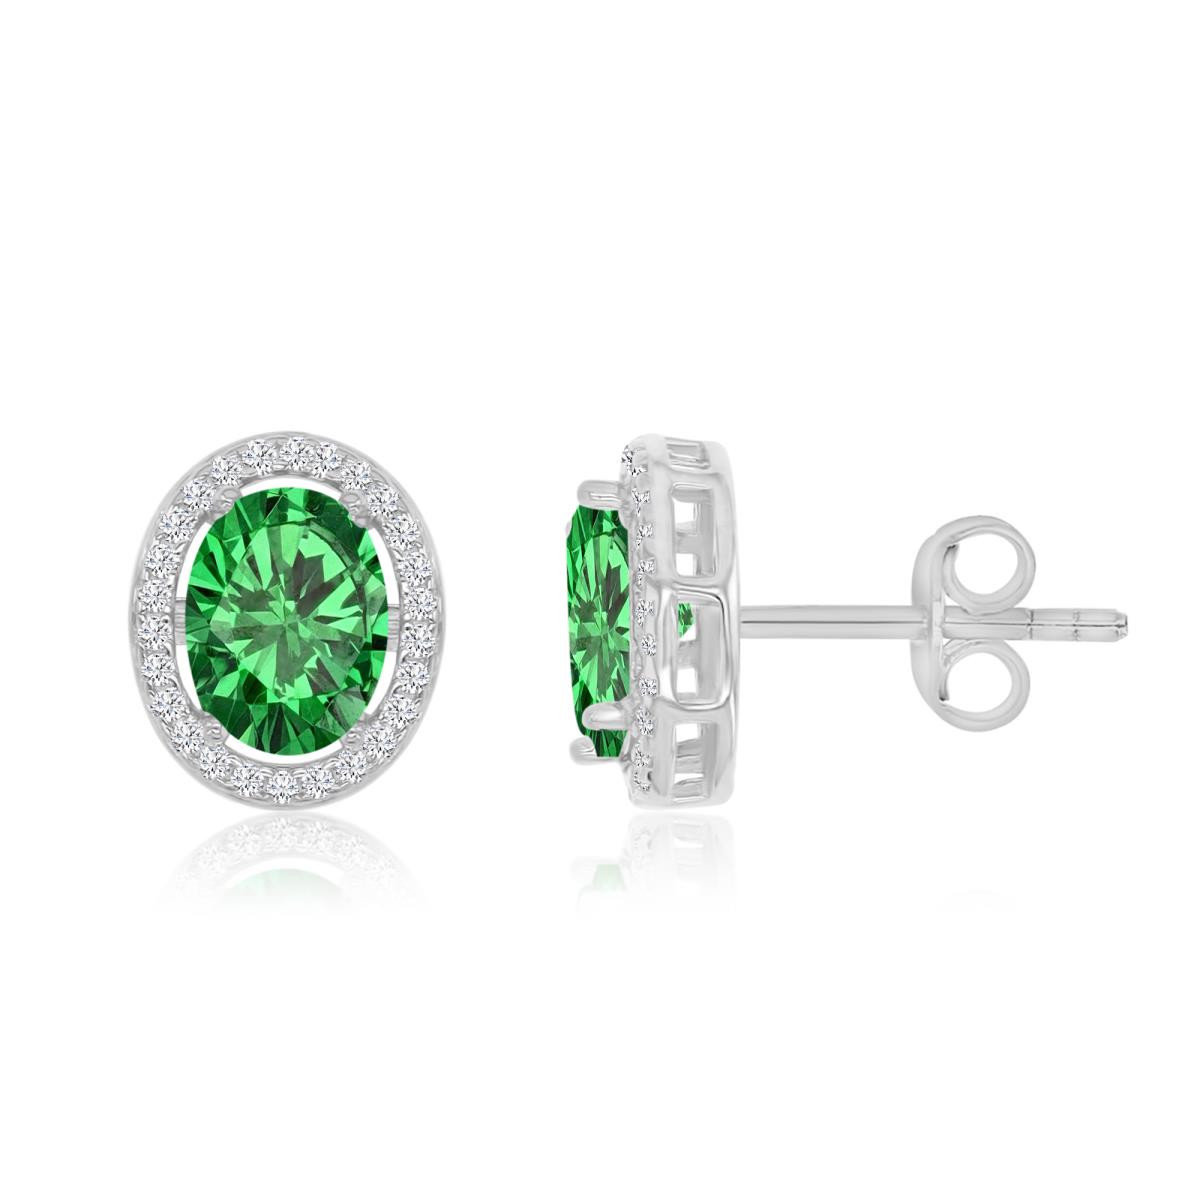 Sterling Silver Rhodium 11MM Polished Green & White CZ Oval Cut Stud Earrings